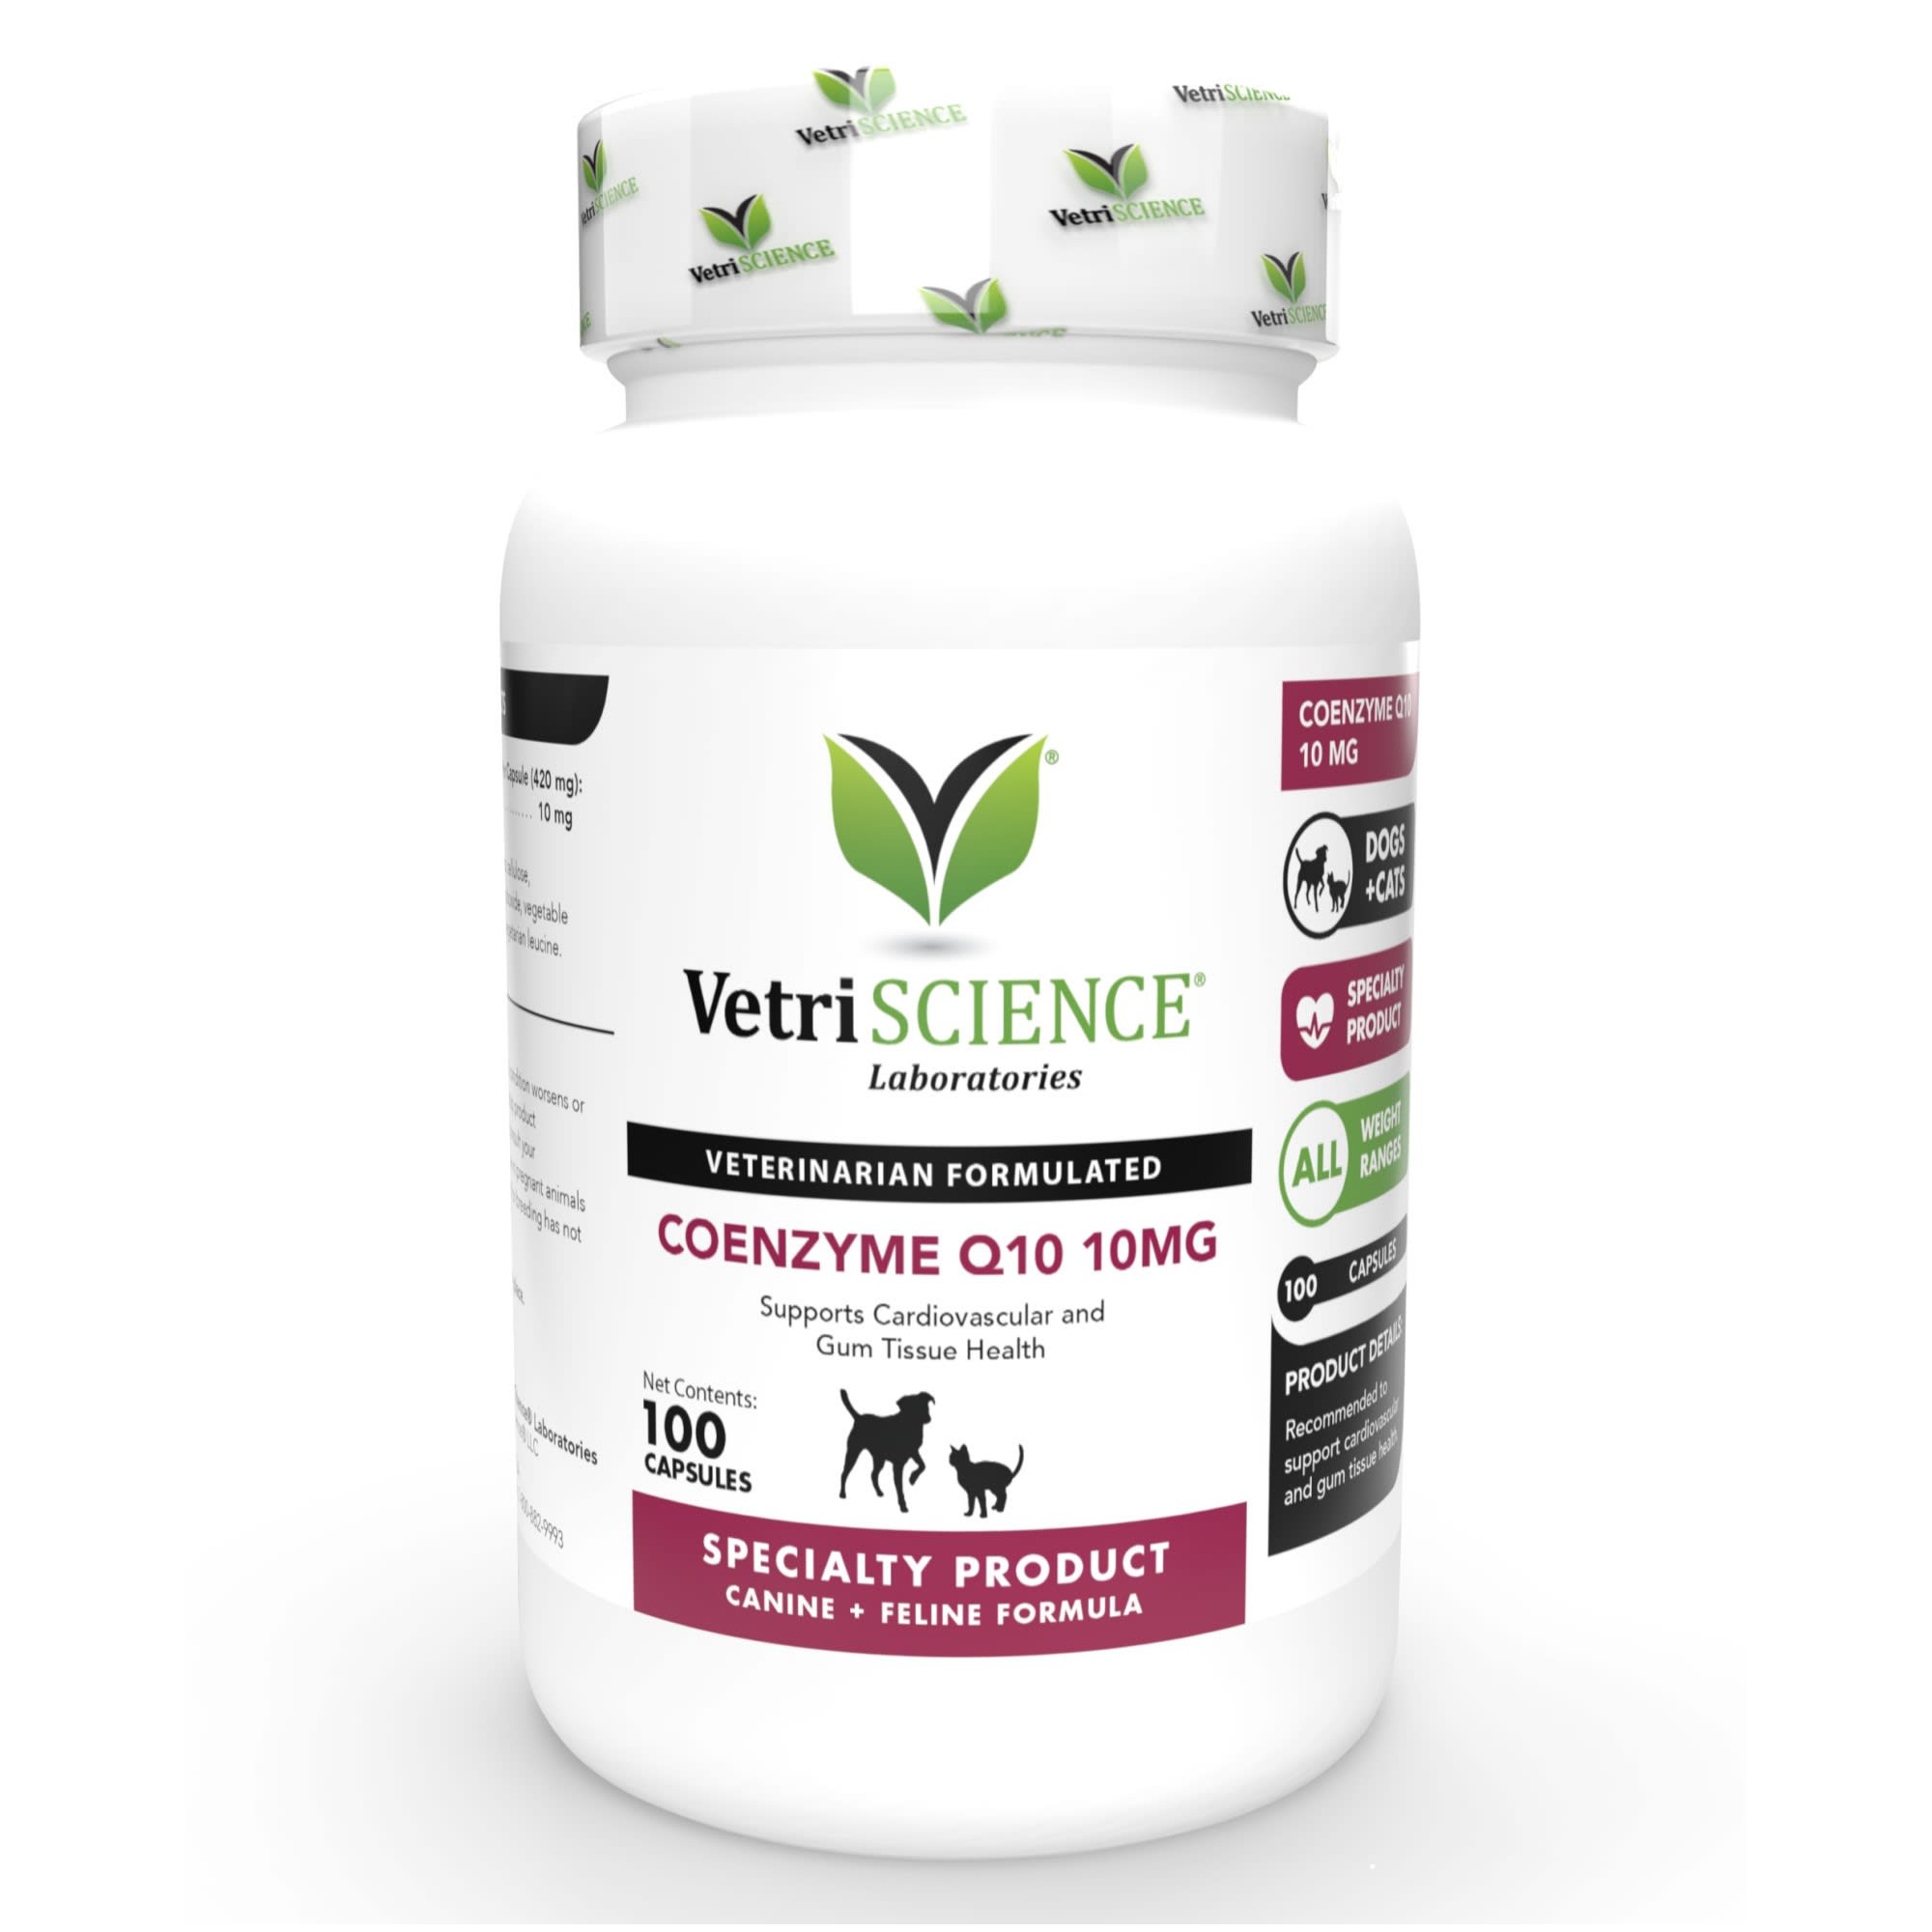 Photos - Dog Medicines & Vitamins VetriSCIENCE Coenzyme Q10 10Mg Capsules Heart Supplement for 